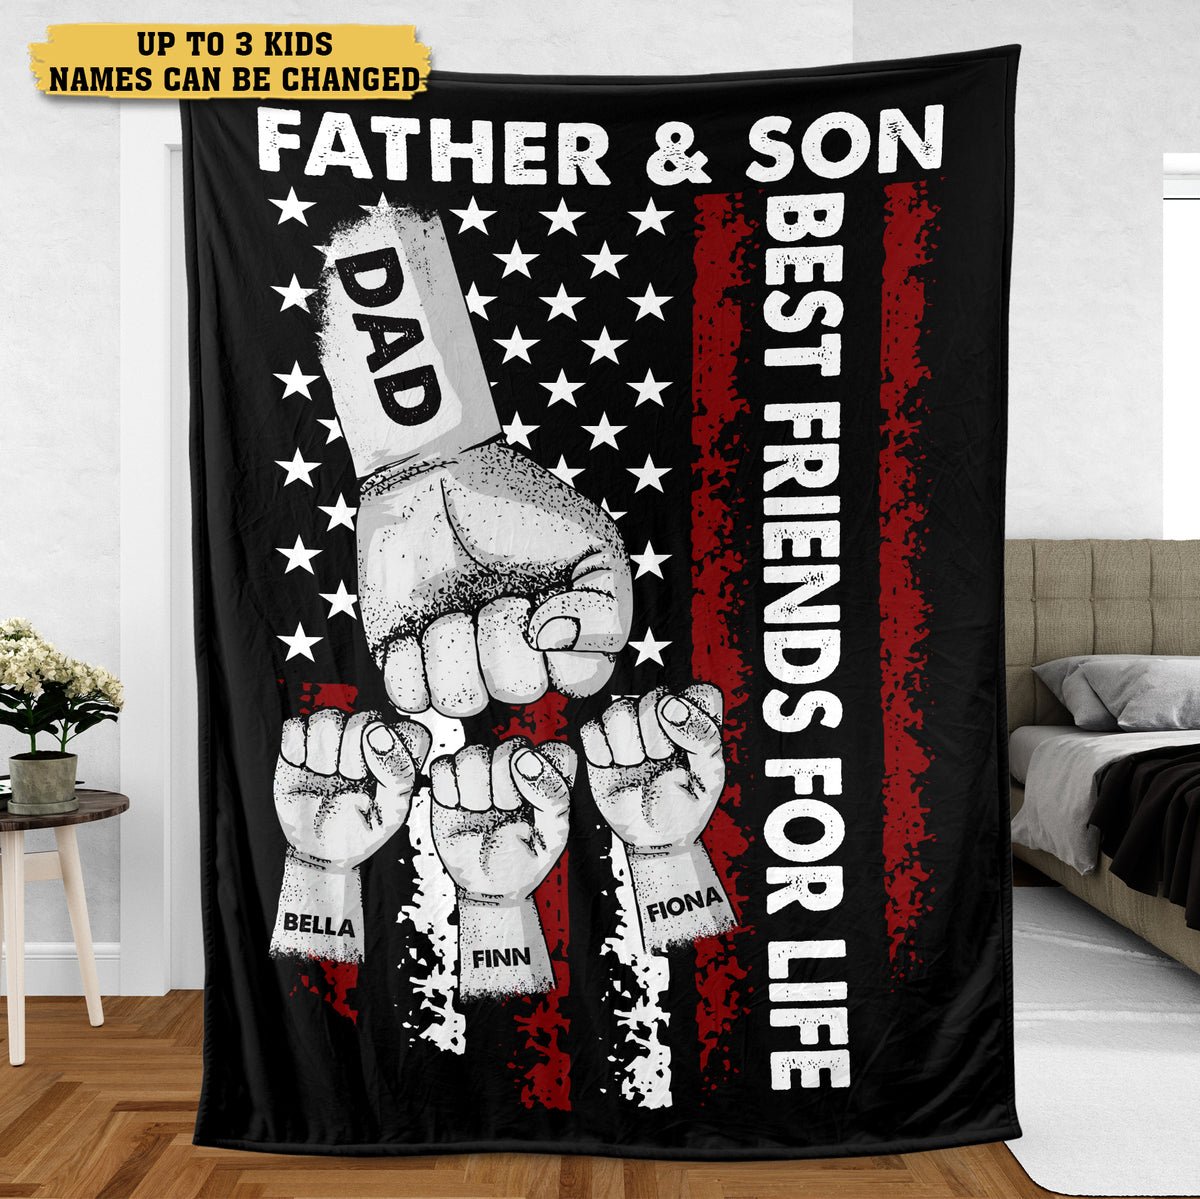 Father & Sons - Personalized Blanket - Best Gift For Father